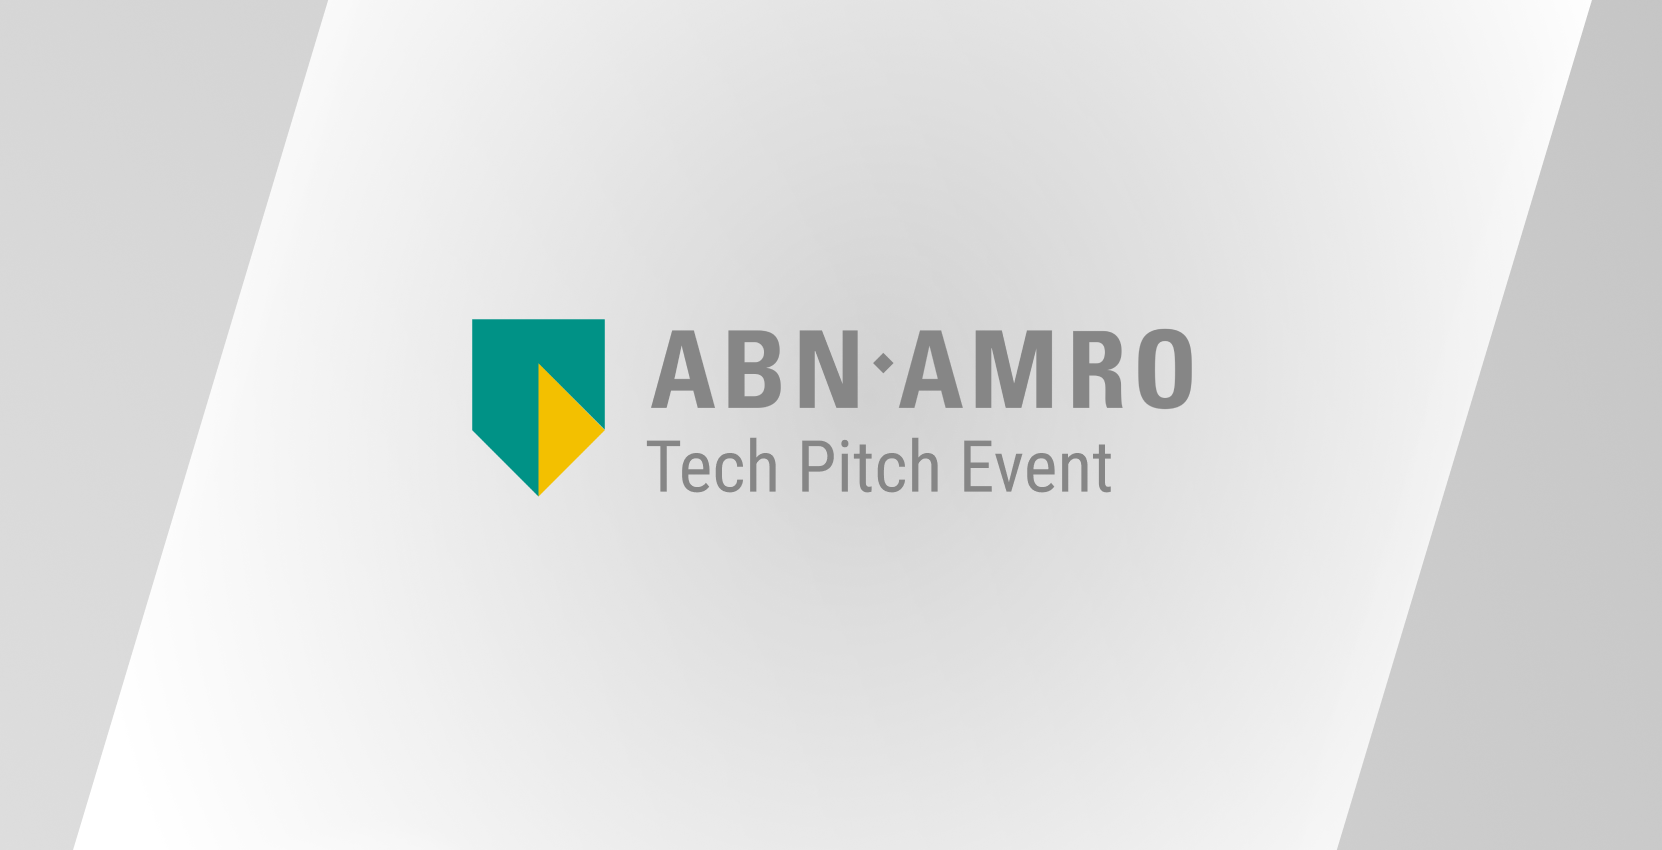 ABN AMRO Tech Pitch Event 2021